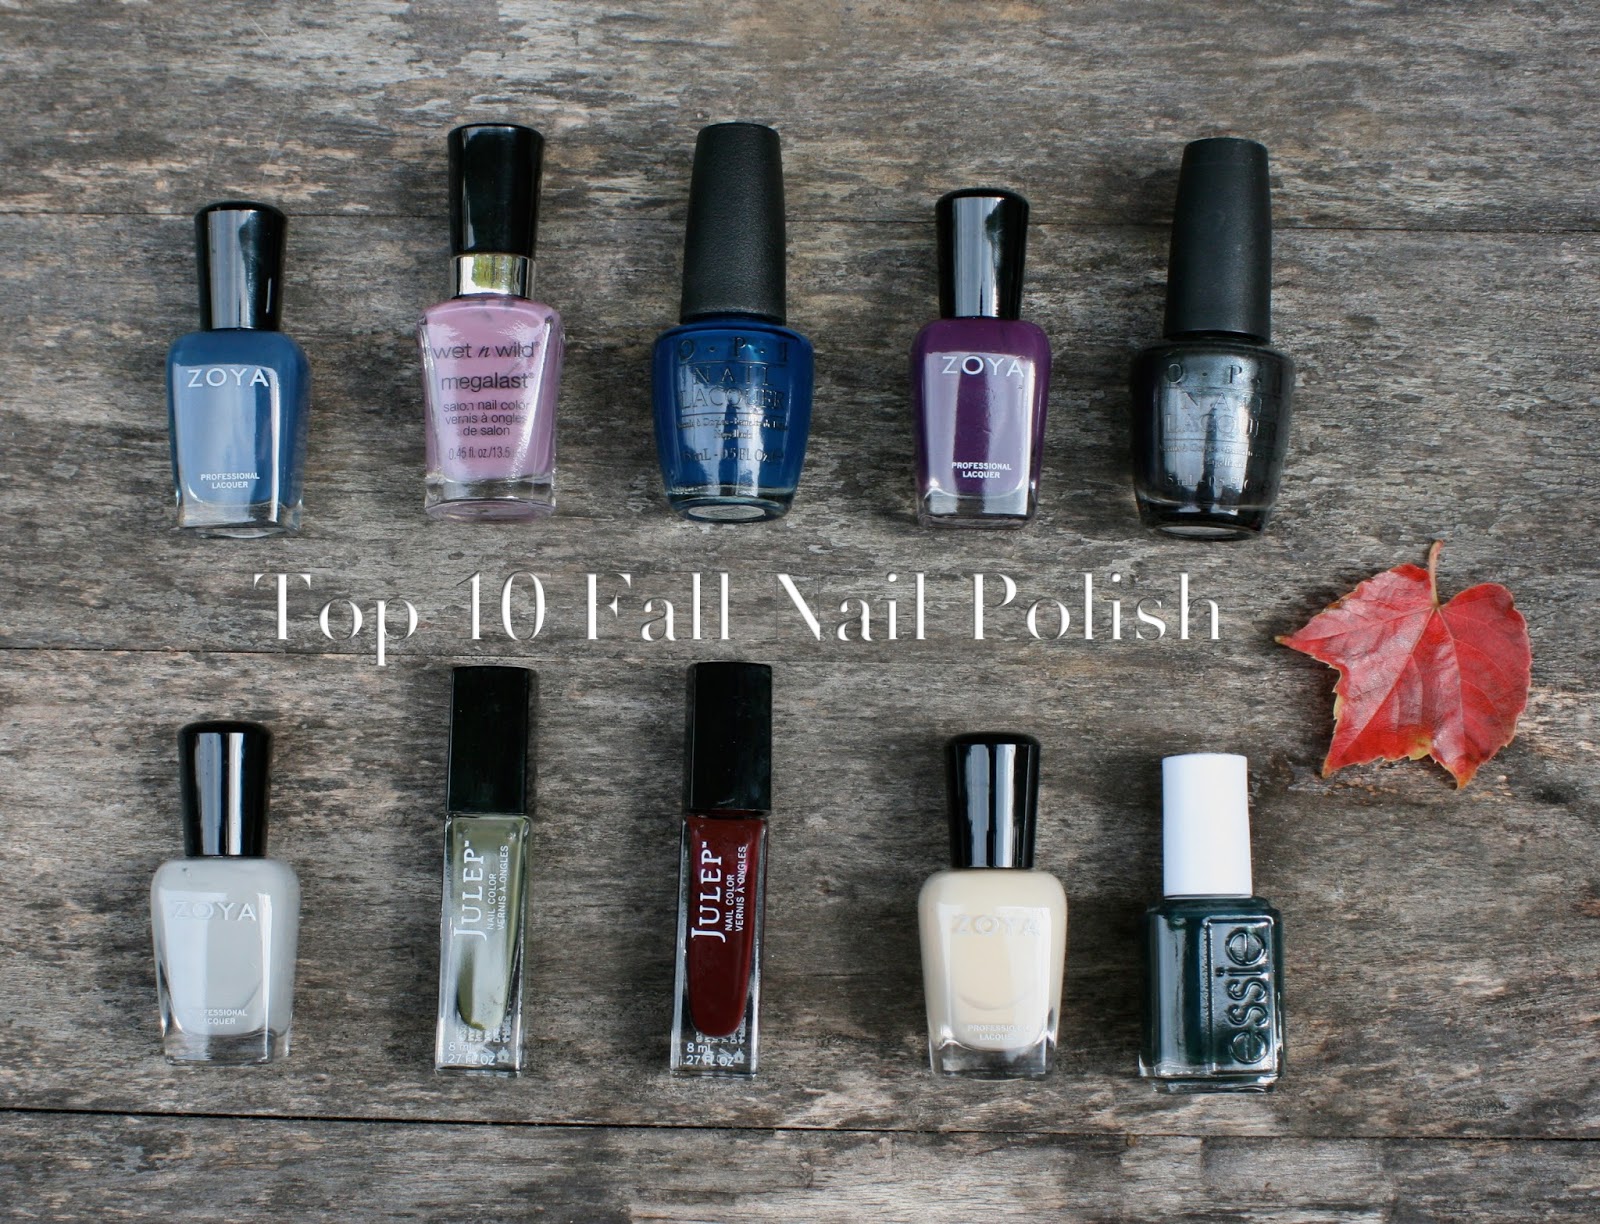 Top 10 Nail Polish Colors According to Popular Opinion - wide 2